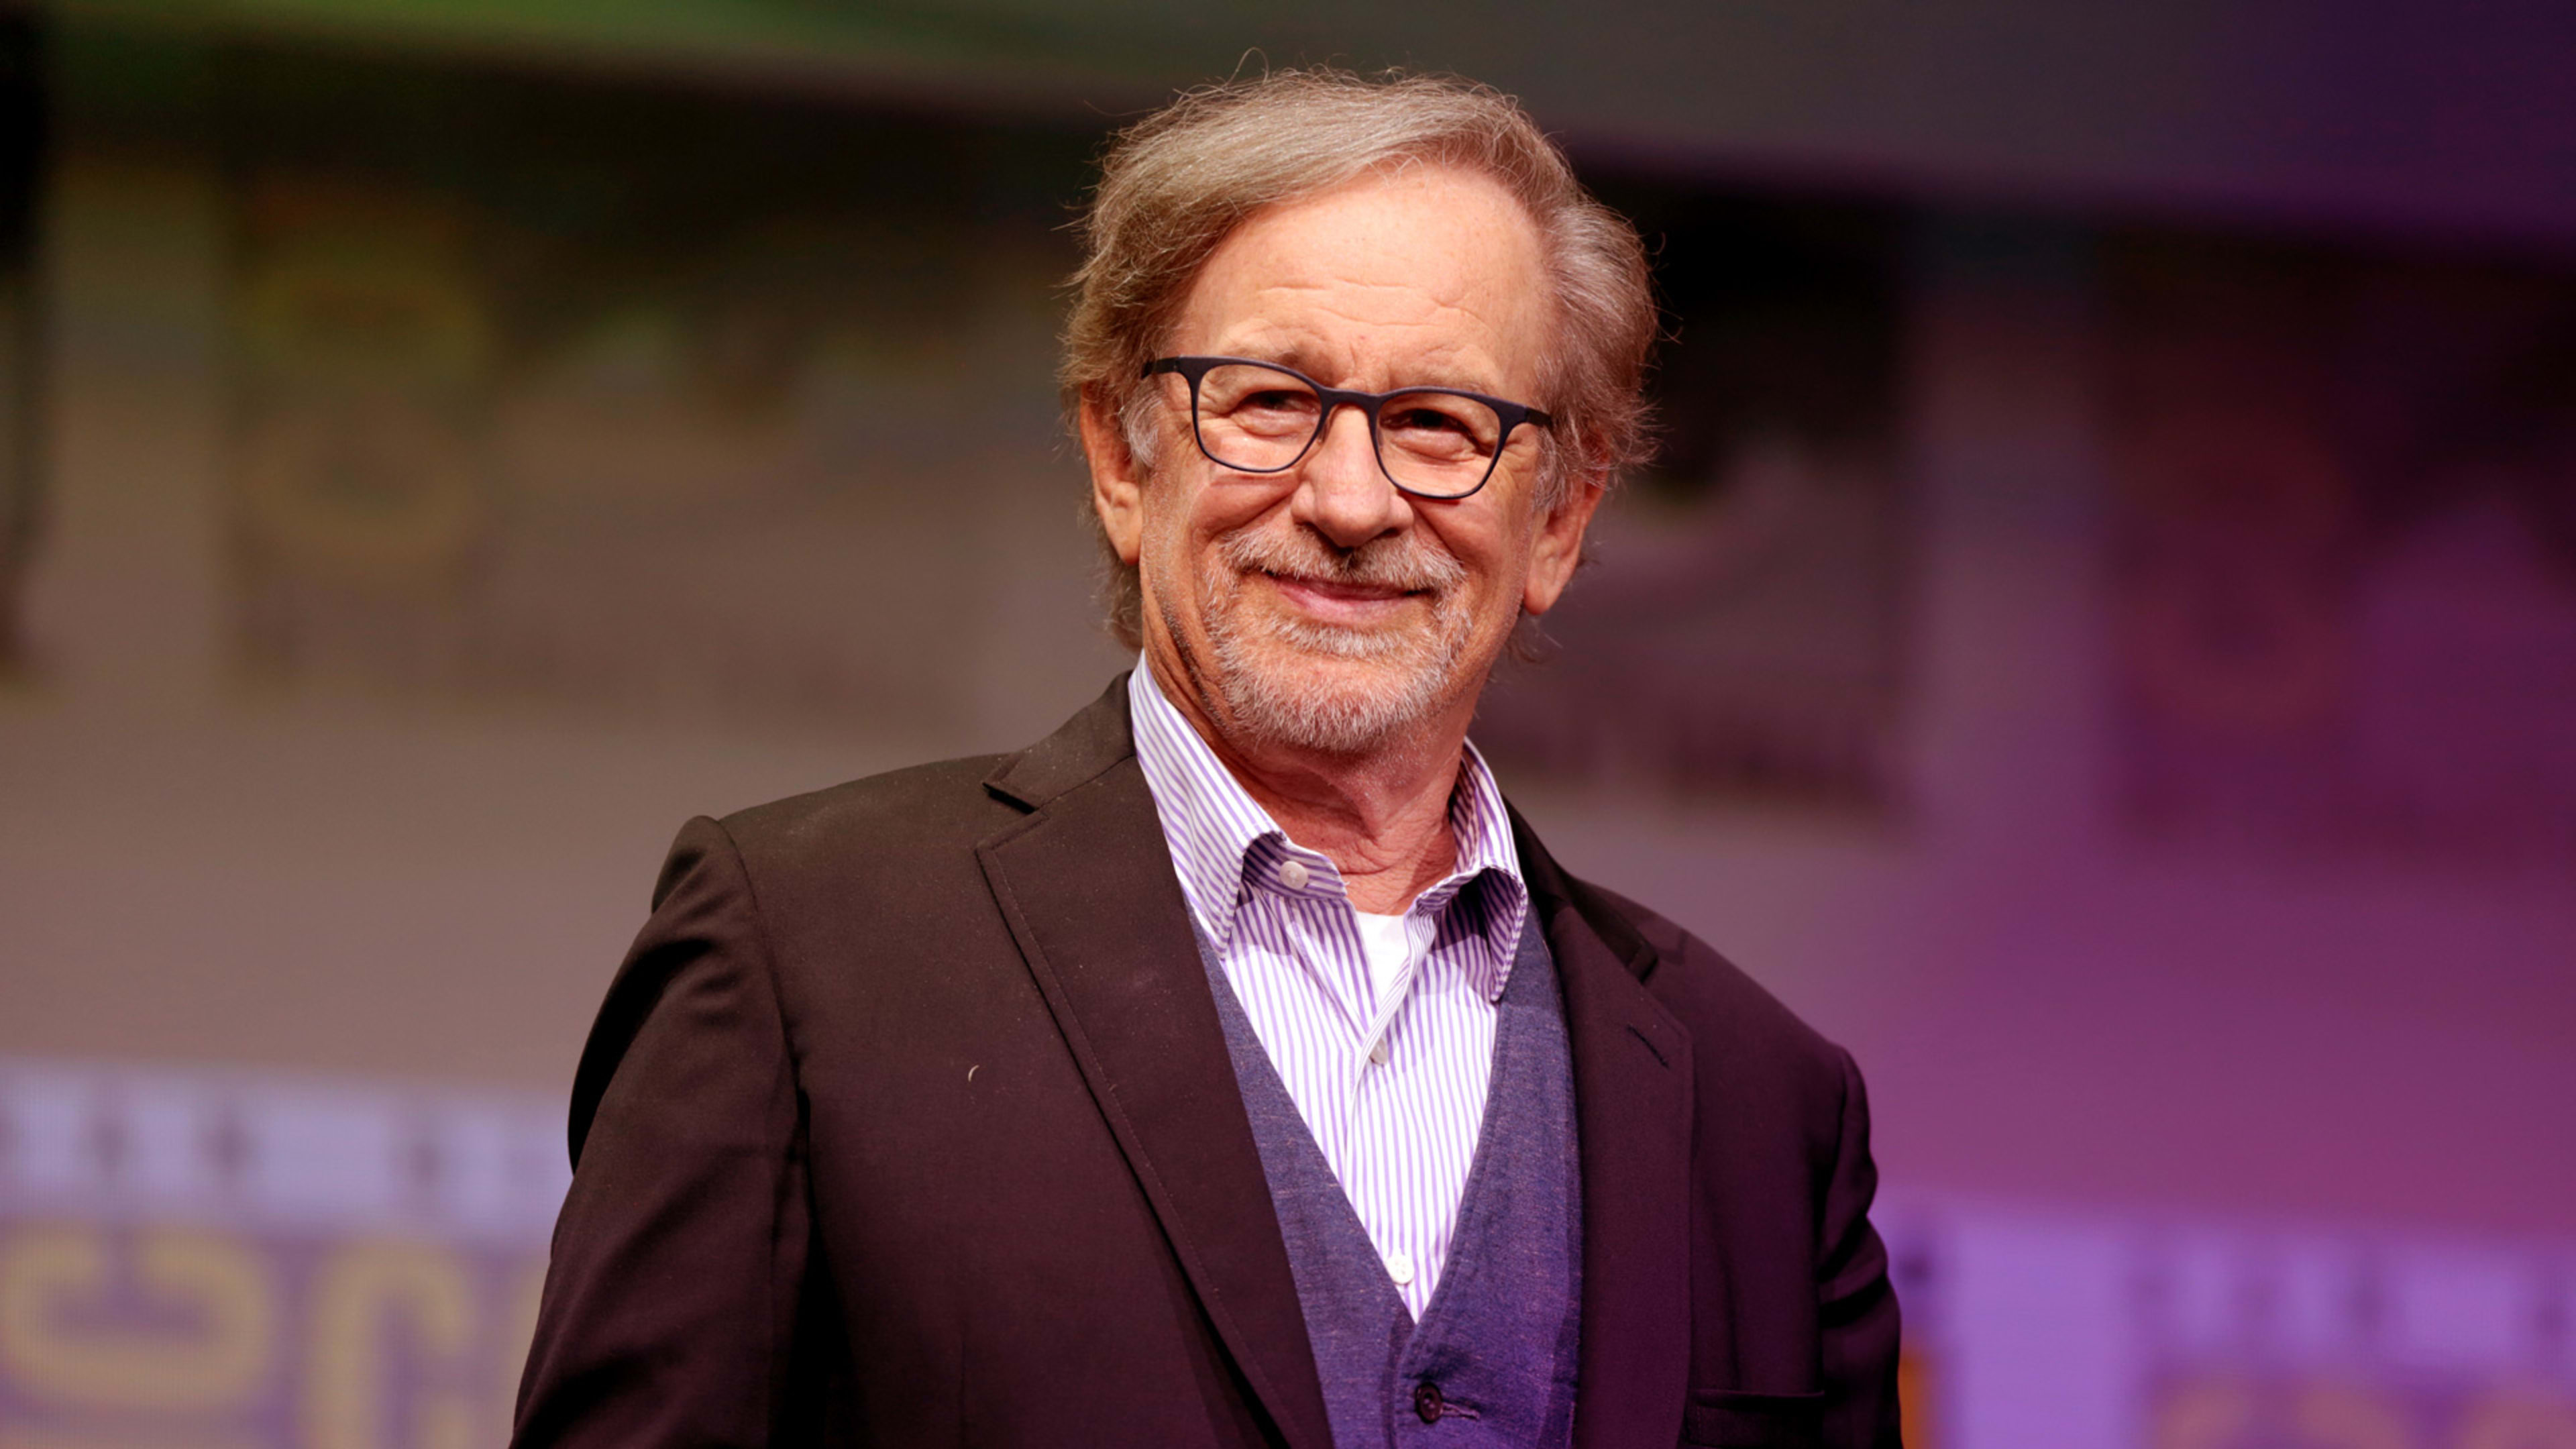 With “Ready Player One,” Steven Spielberg has become the first $10 billion filmmaker